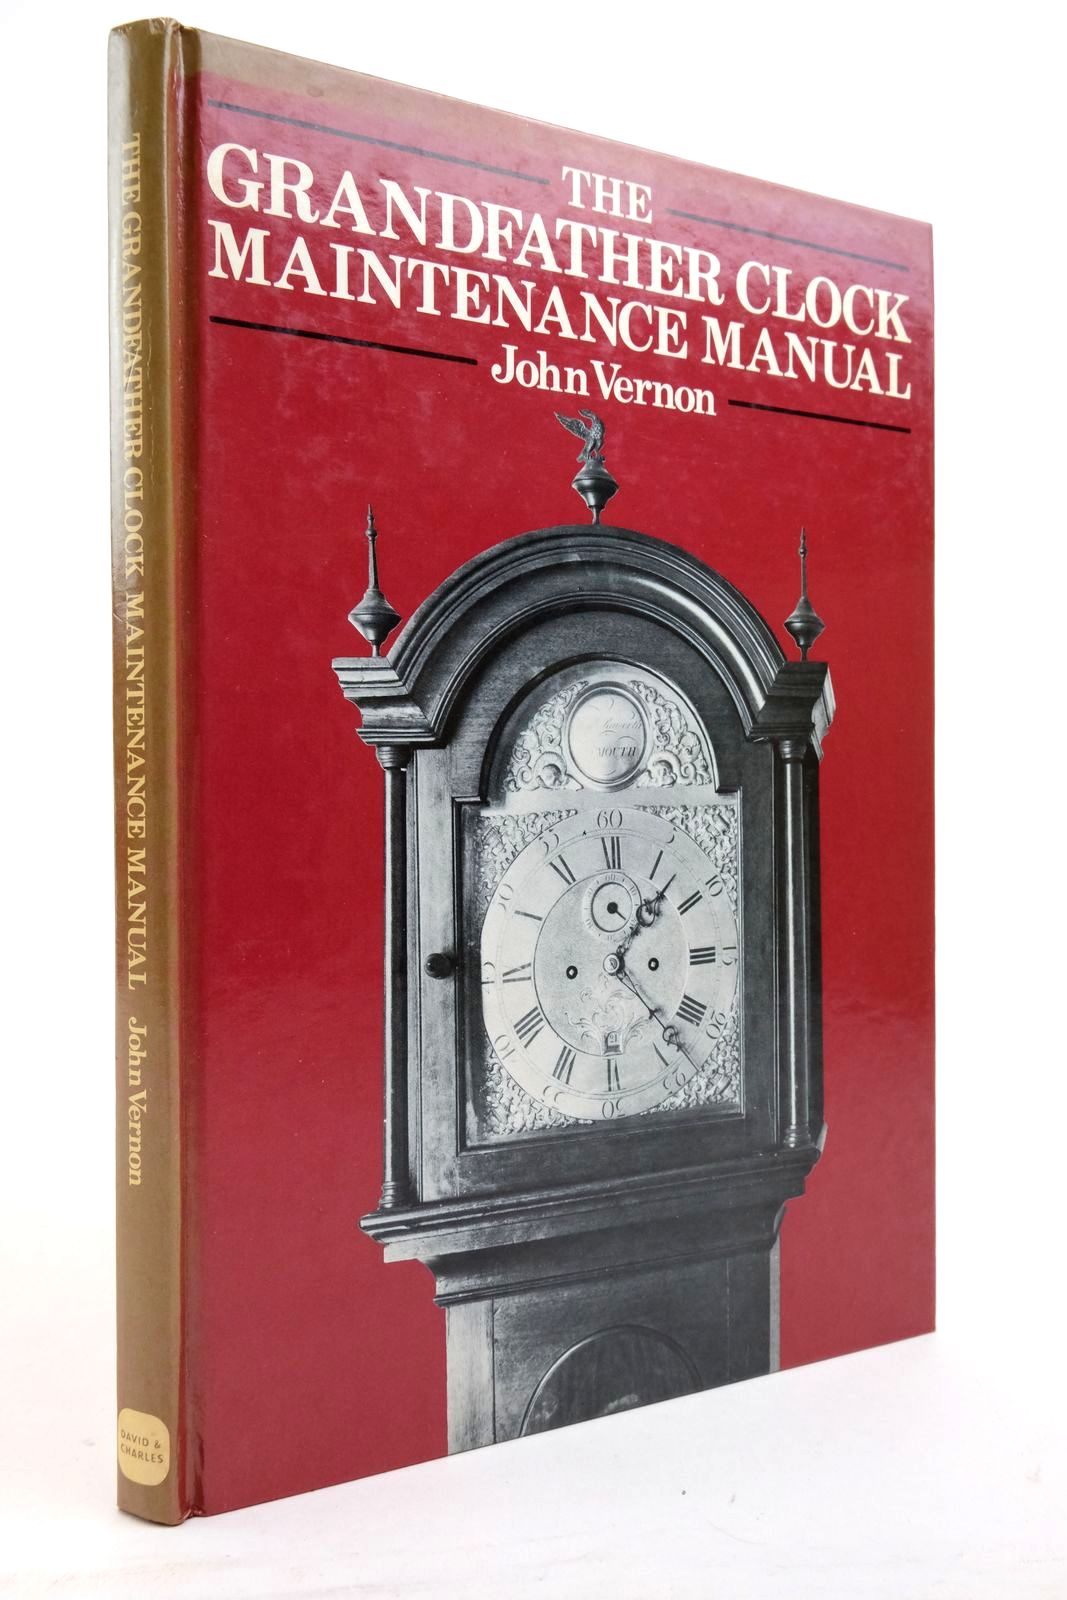 Photo of THE GRANDFATHER CLOCK MAINTENANCE MANUAL written by Vernon, John published by David & Charles (STOCK CODE: 2137965)  for sale by Stella & Rose's Books